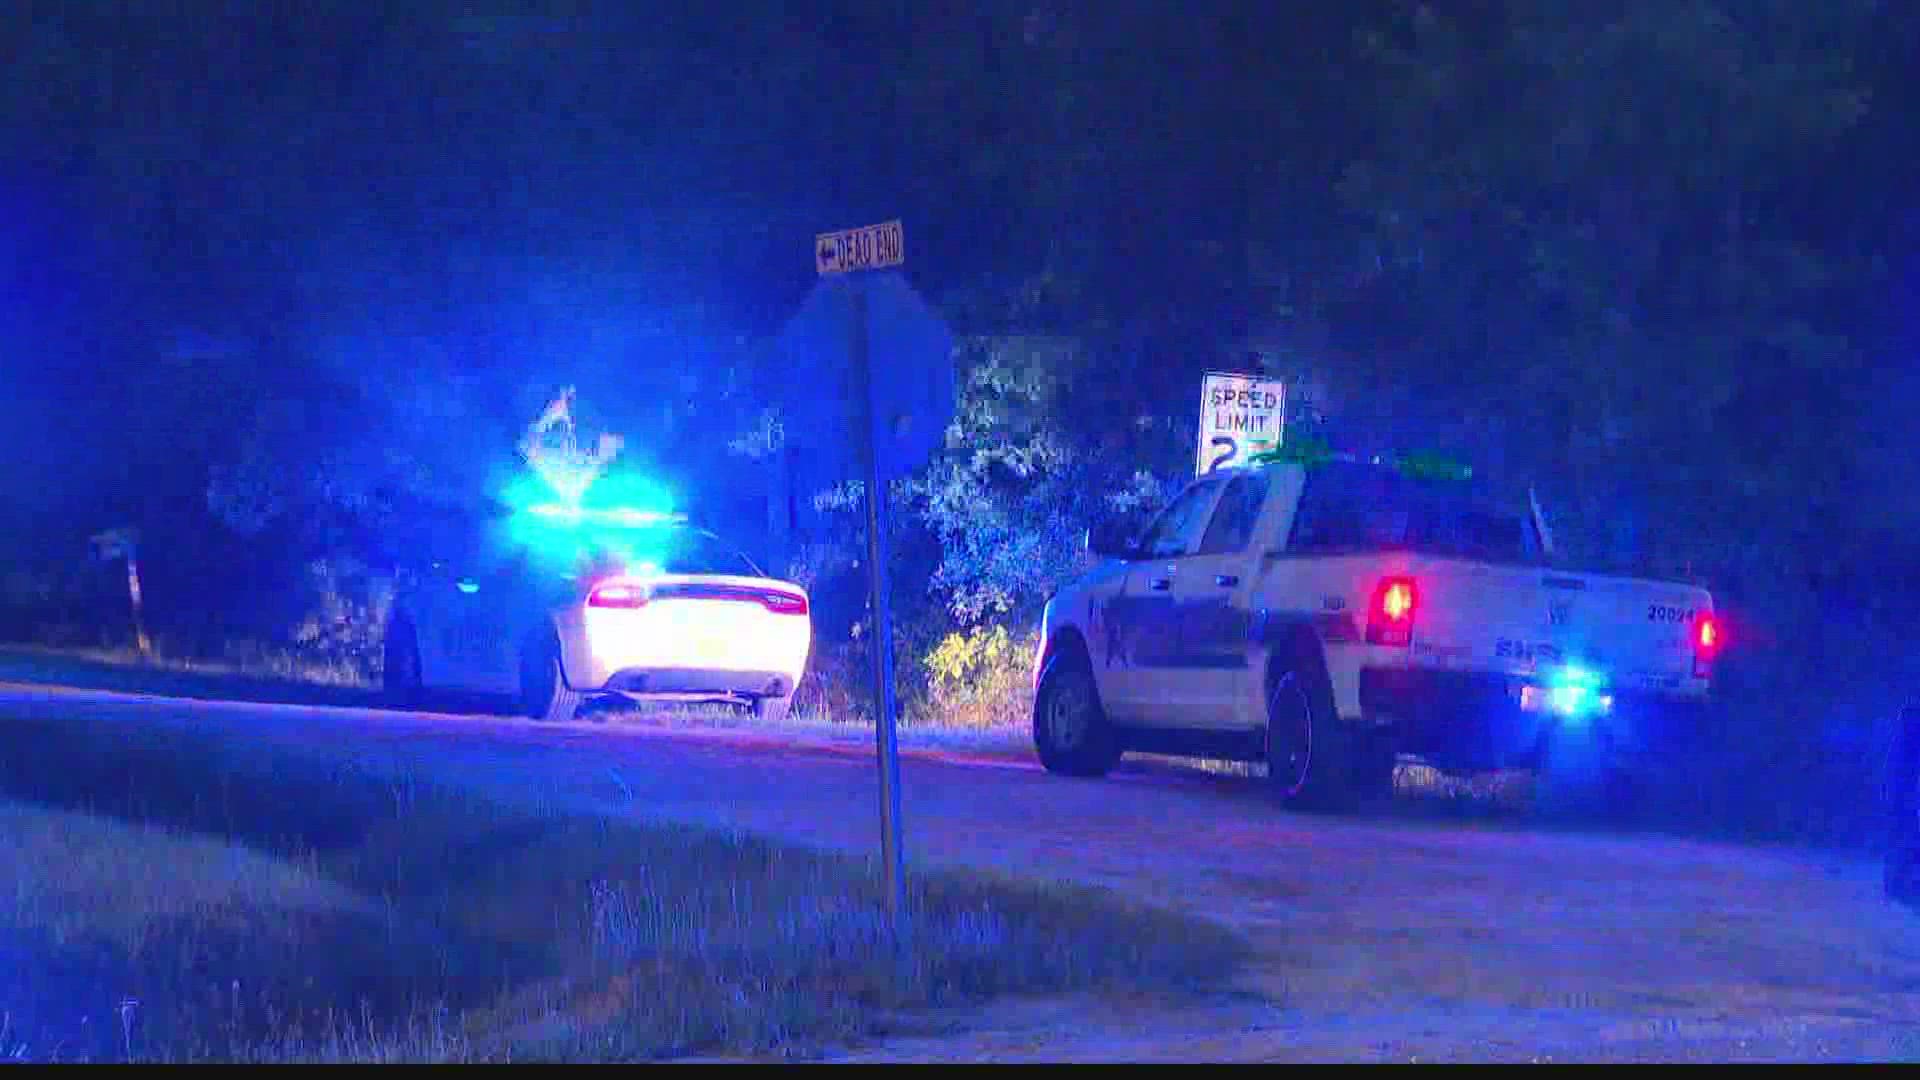 Deputies say it happened in the 3100 block of Dothan Road shortly before 7 p.m.